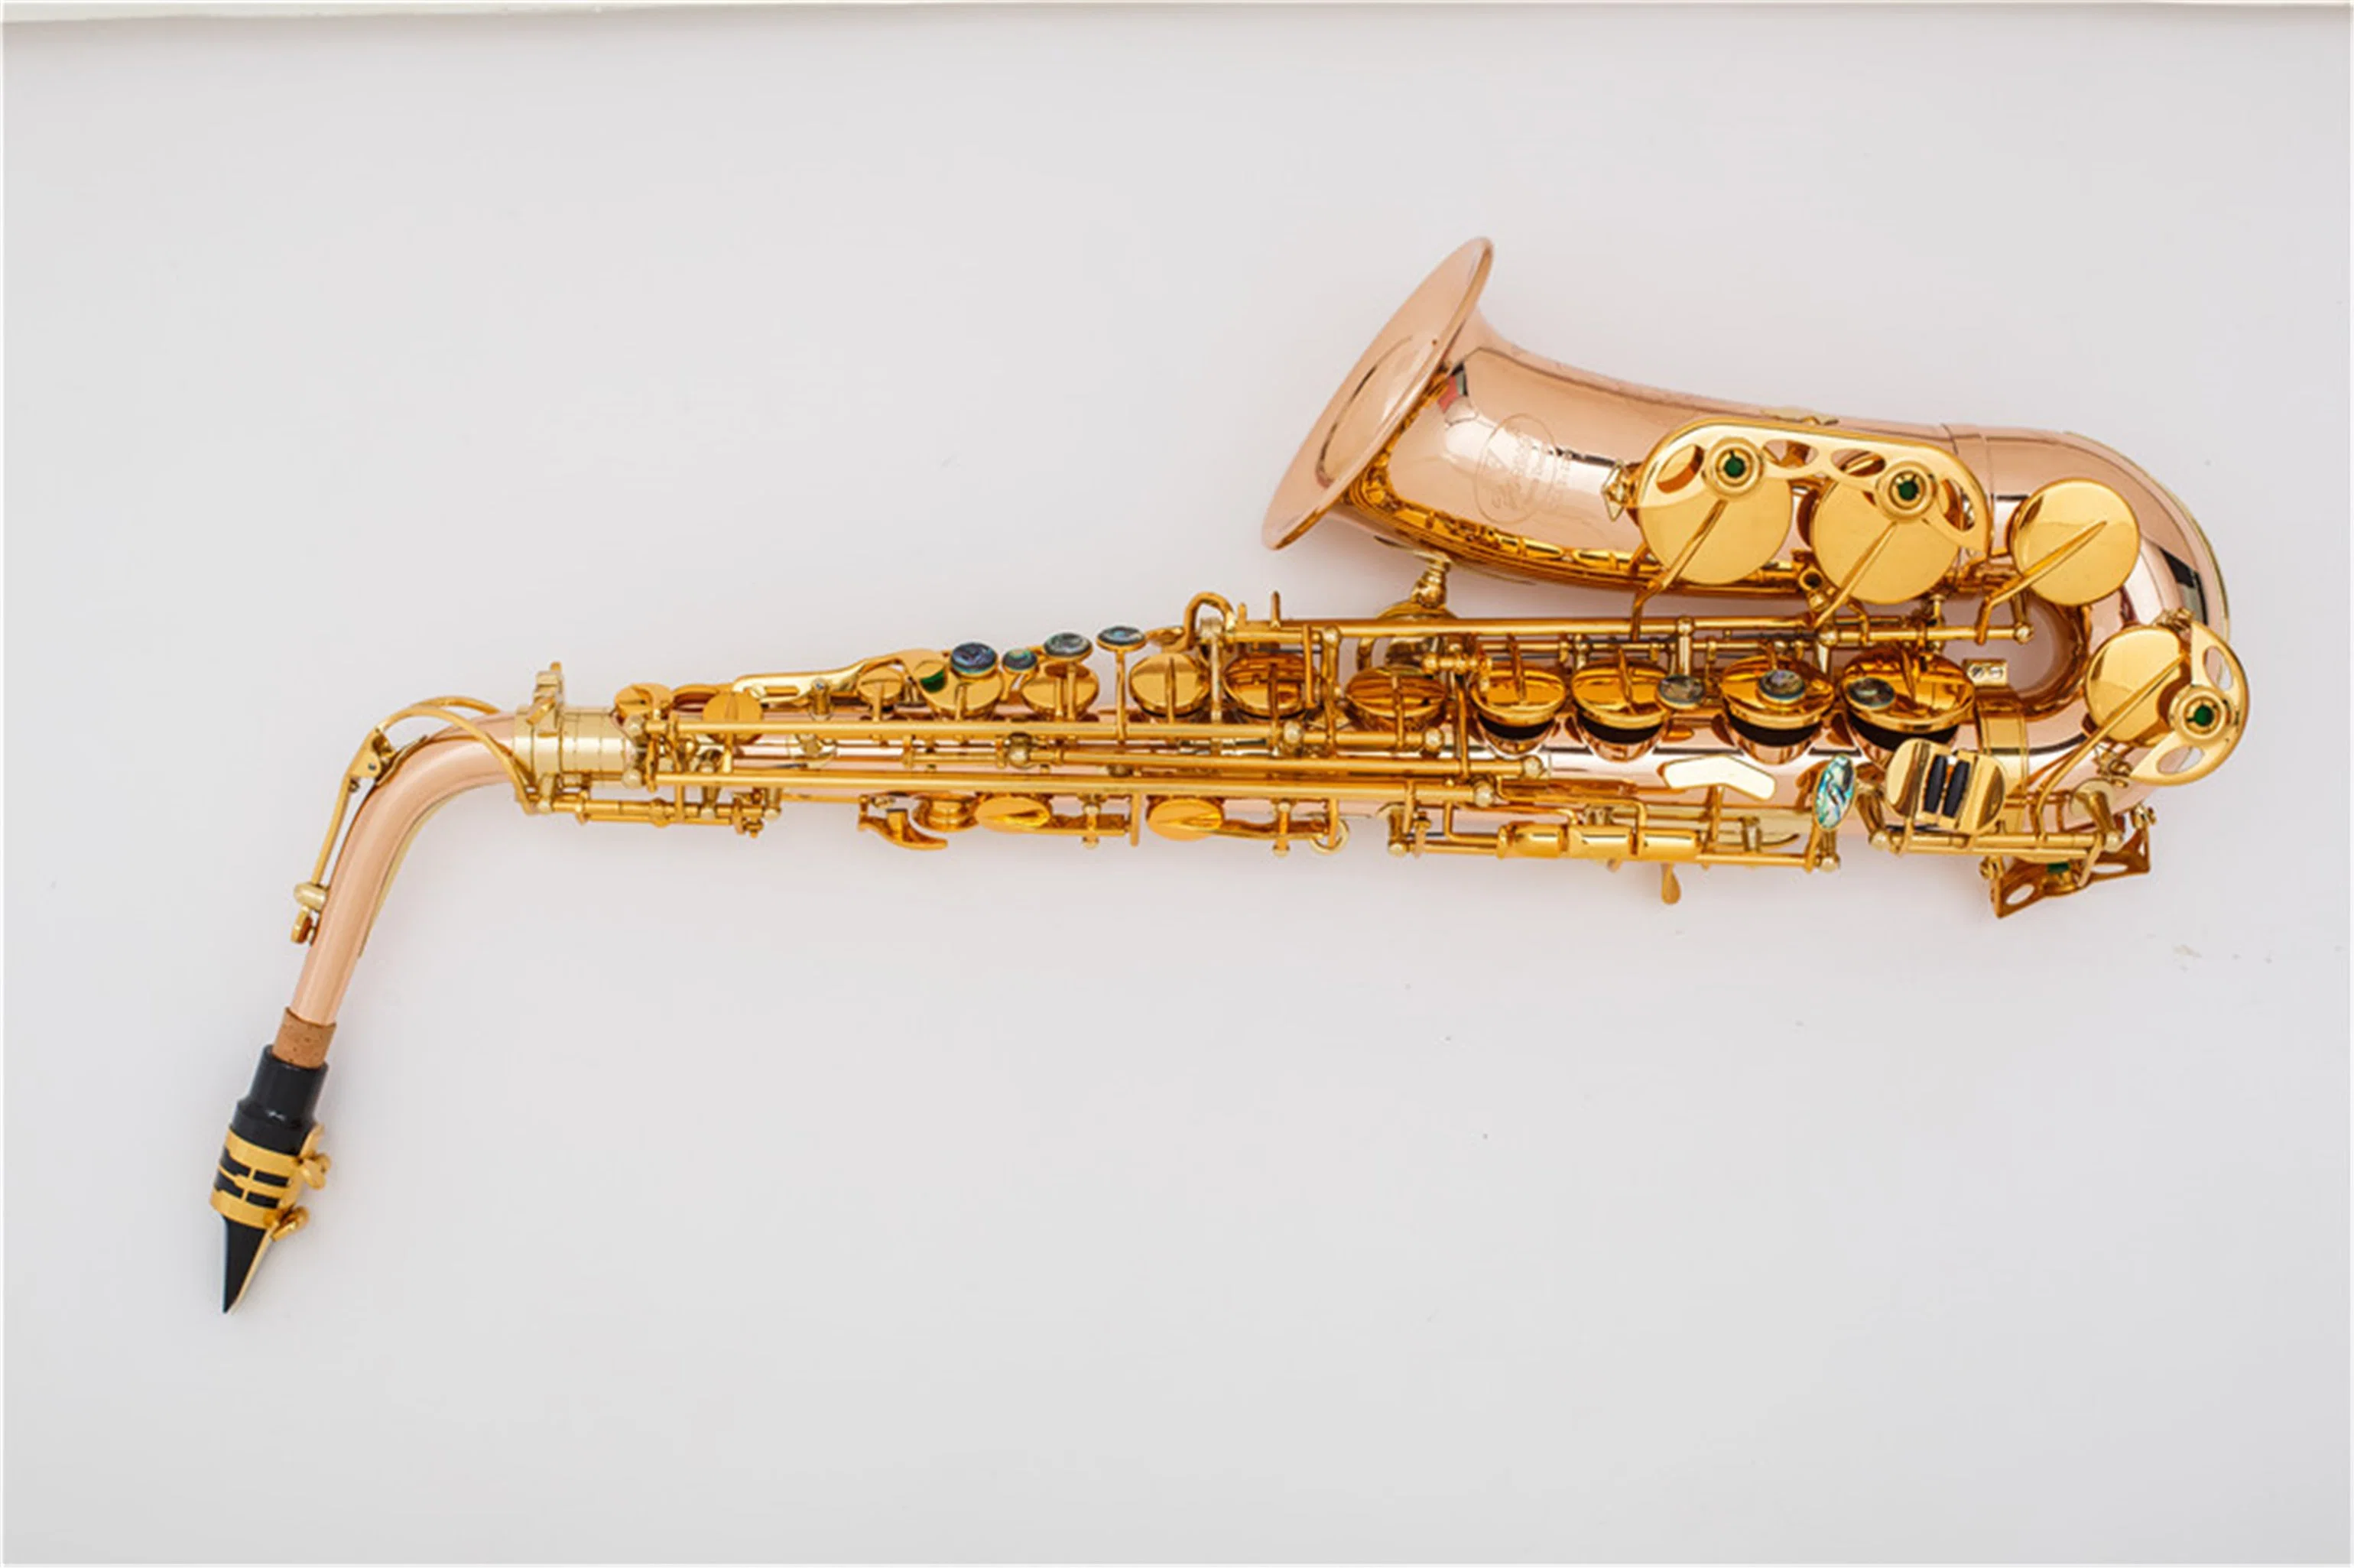 Red Copper Alto Saxophone, Made in China, Italy Pisoni Pads, Wholesale Musical Instrument